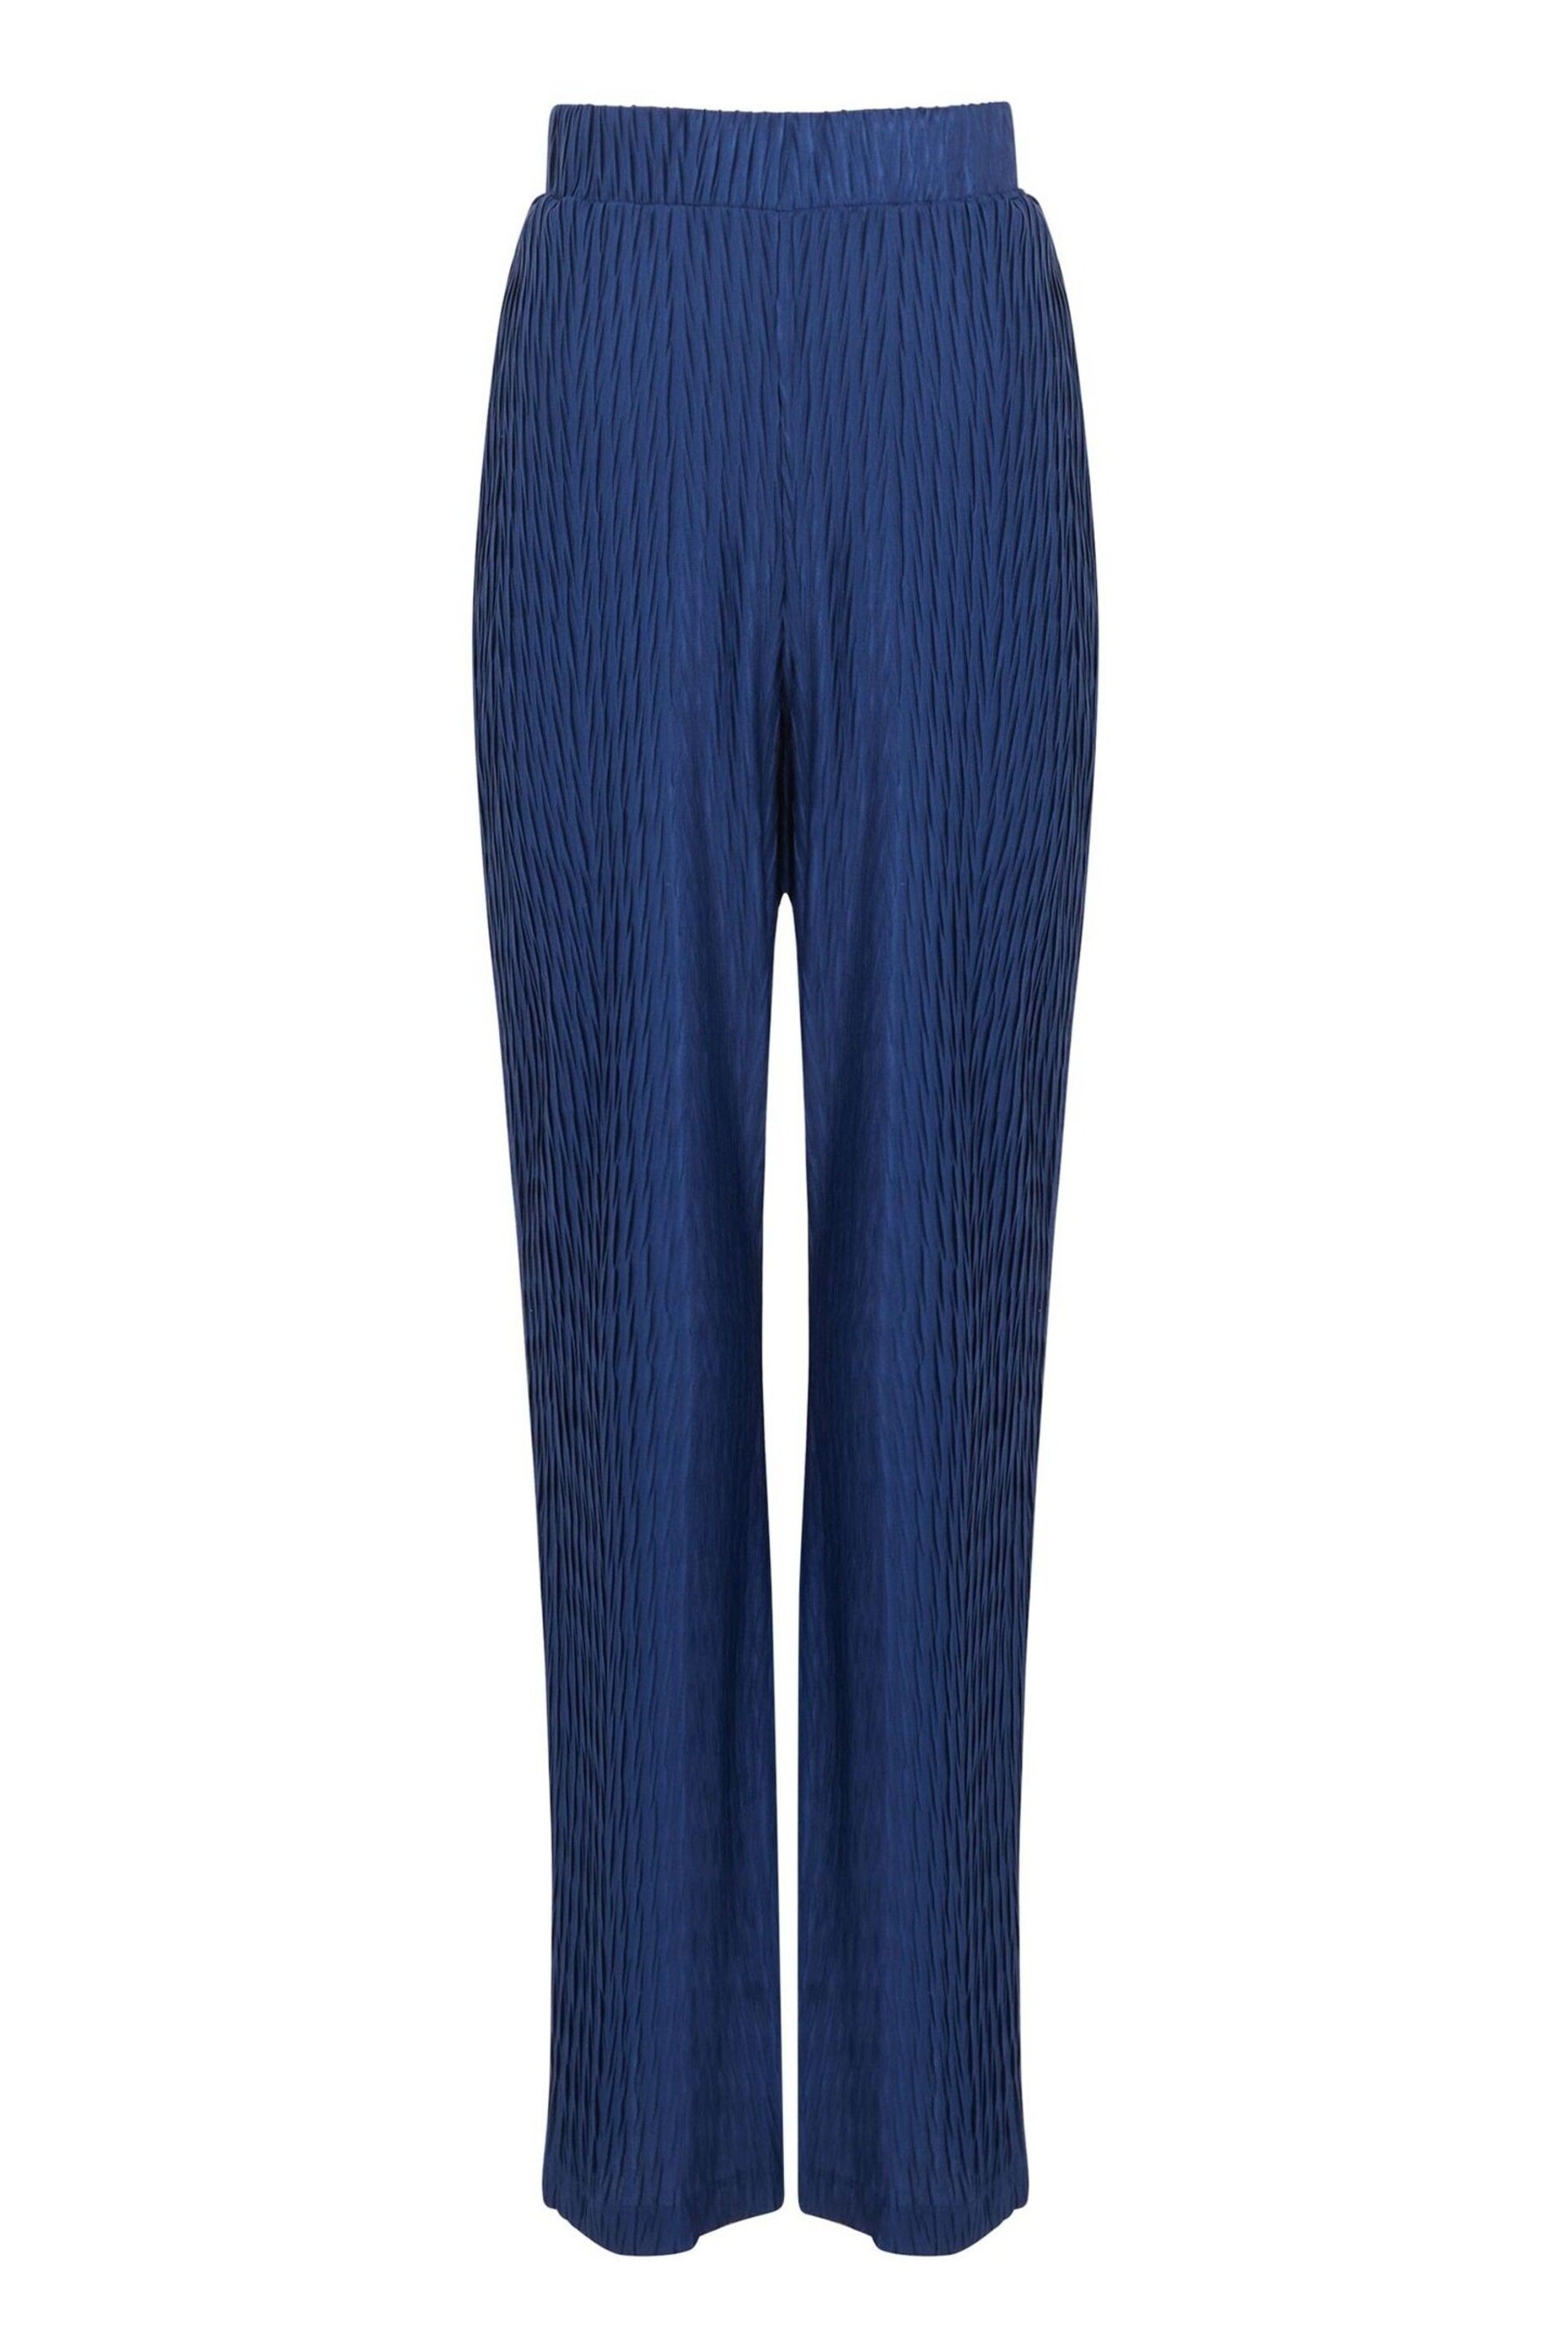 French Connection Scarlette Trousers - Image 4 of 5